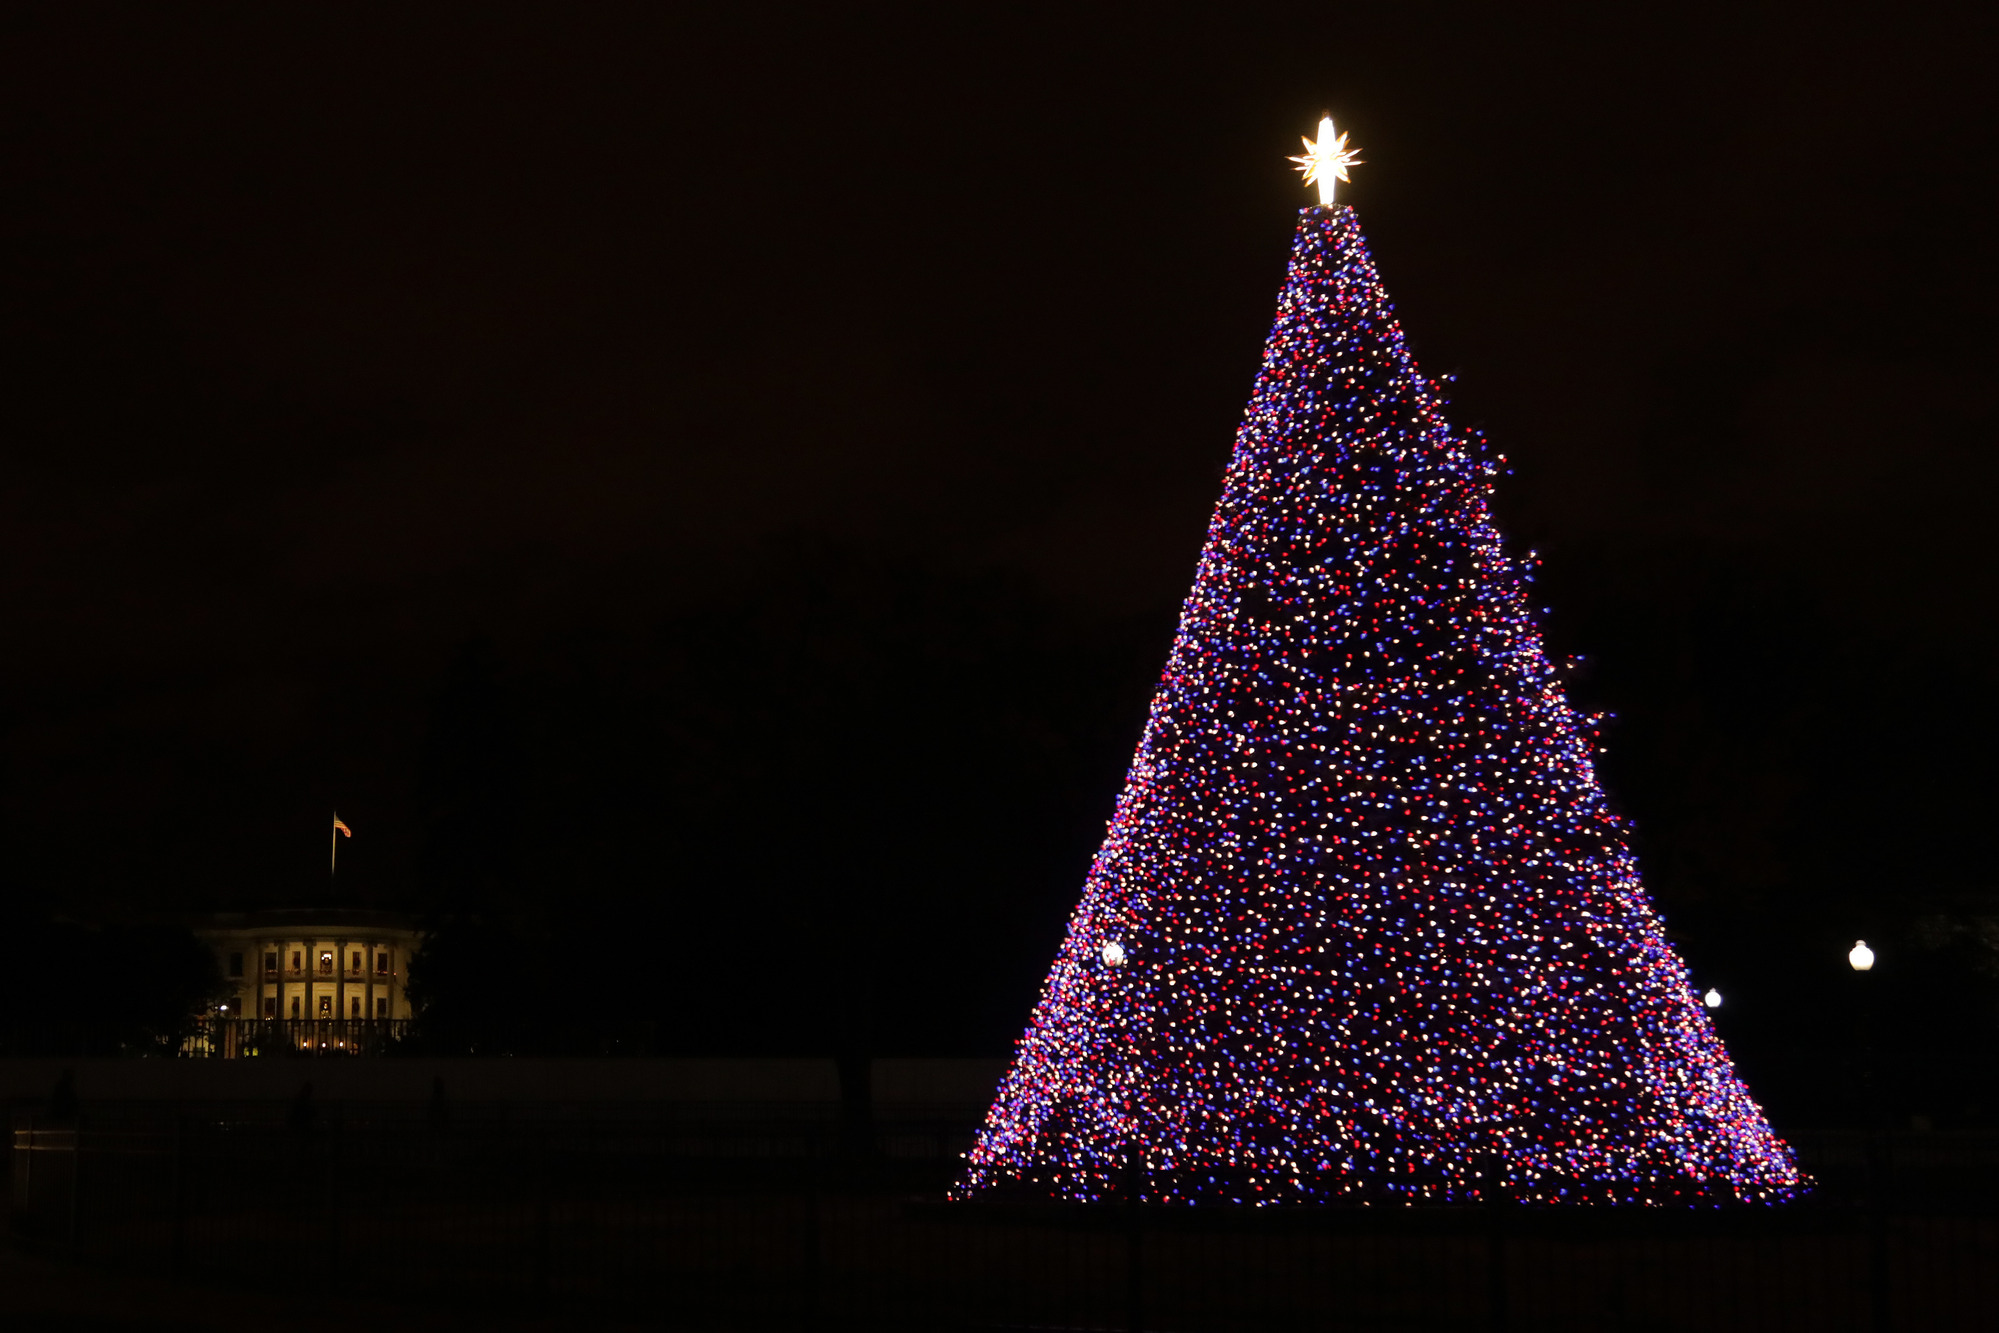 The lit National Christmas Tree with the White House in the background.